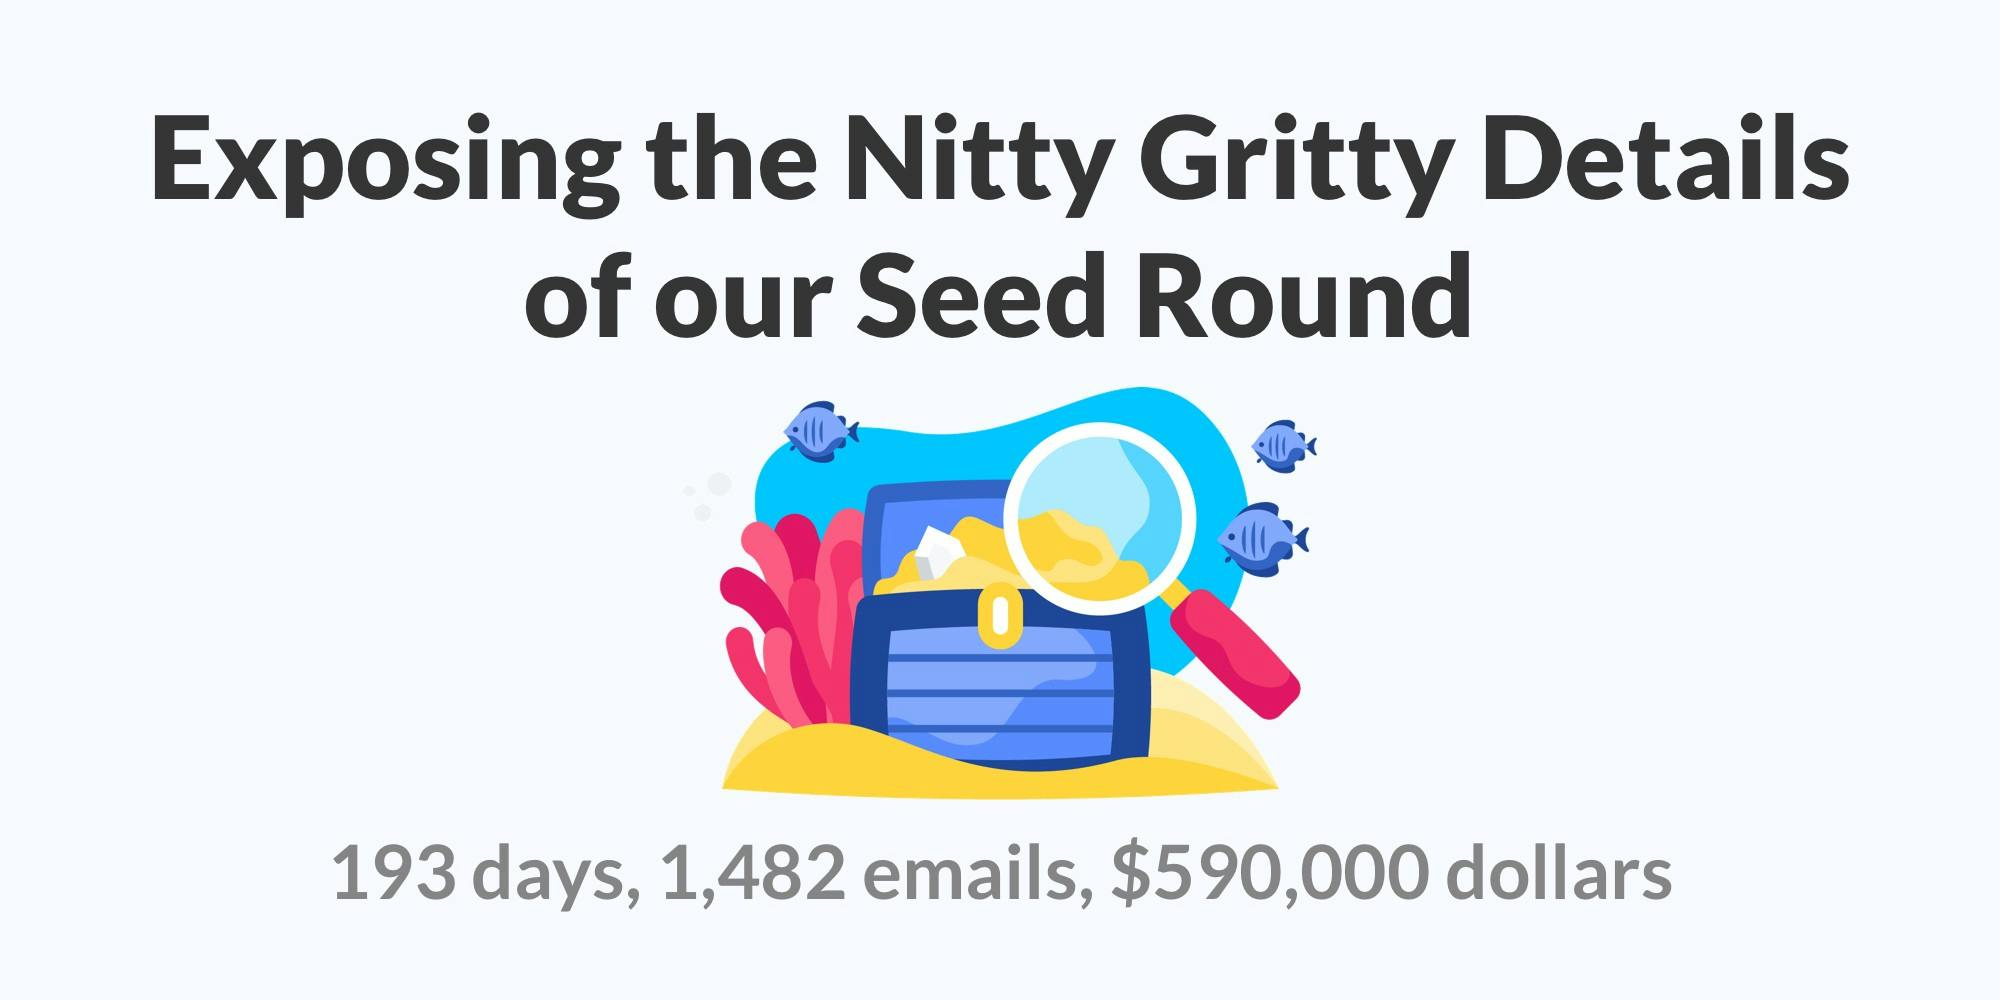 /193-days-1-482-emails-590-000-dollars-exposing-the-nitty-gritty-details-of-our-seed-round-61d0bbef9404 feature image